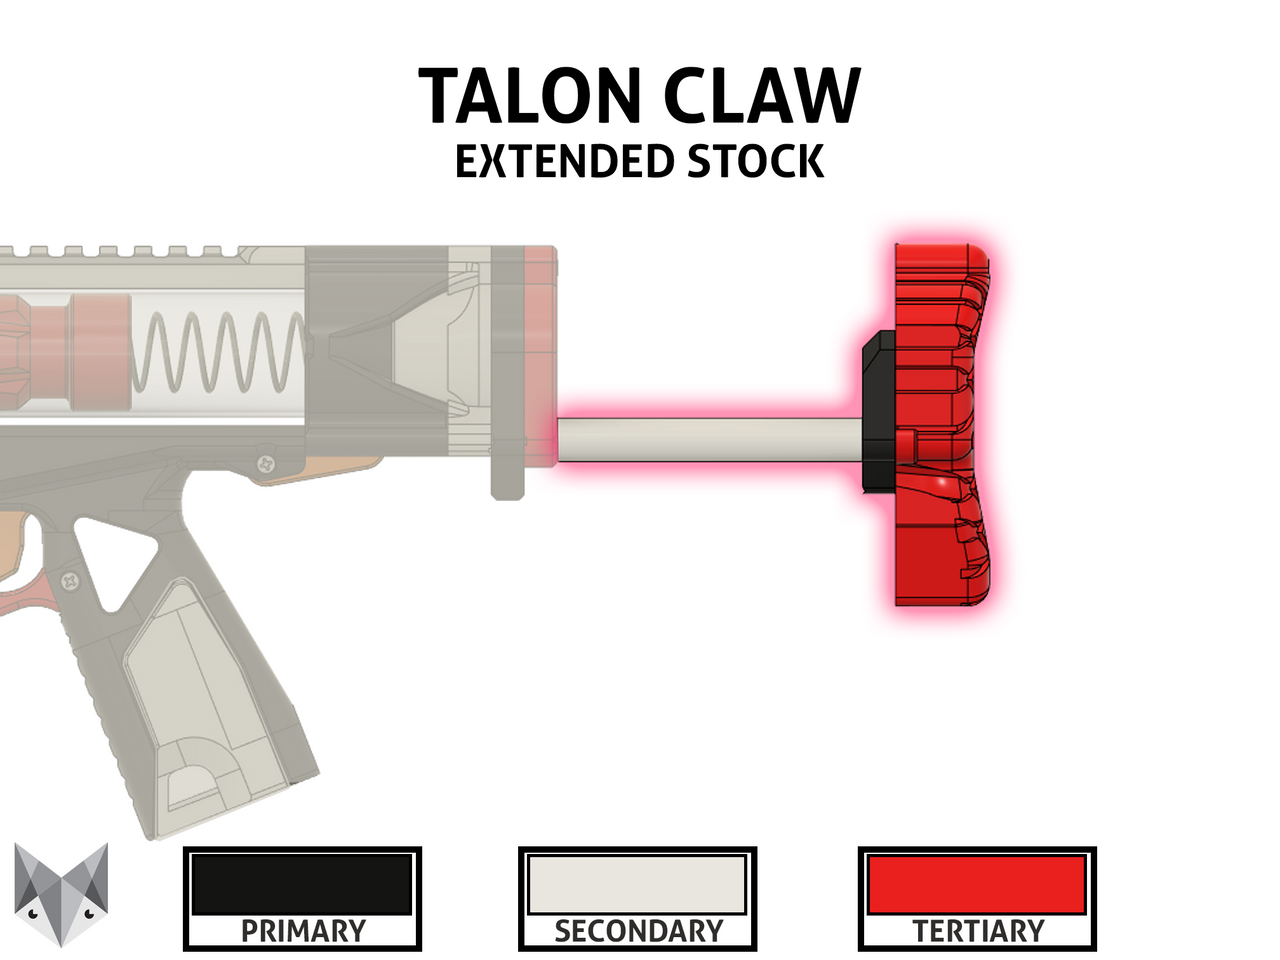 Talon Claw Extended Stock